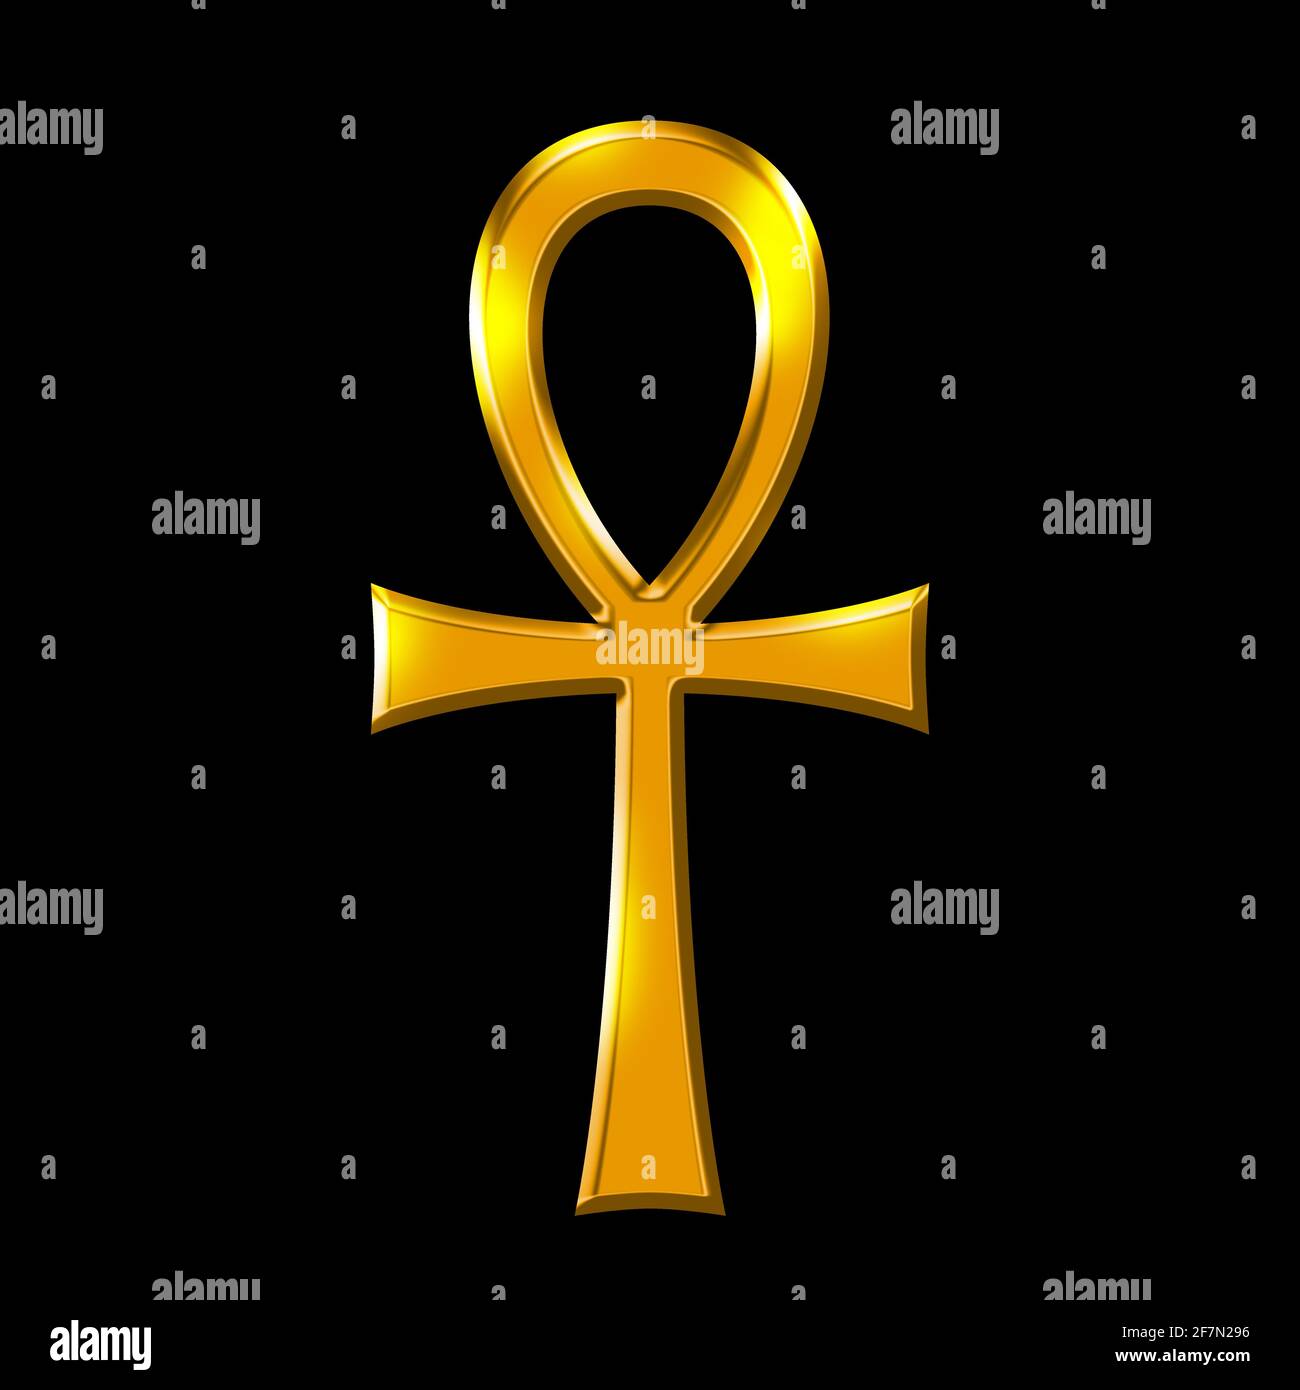 Golden Ankh symbol, the key of life over black. Breath of life, key of the Nile, crux ansata. Cross with handle. Ancient Egyptian sign and hieroglyph. Stock Photo